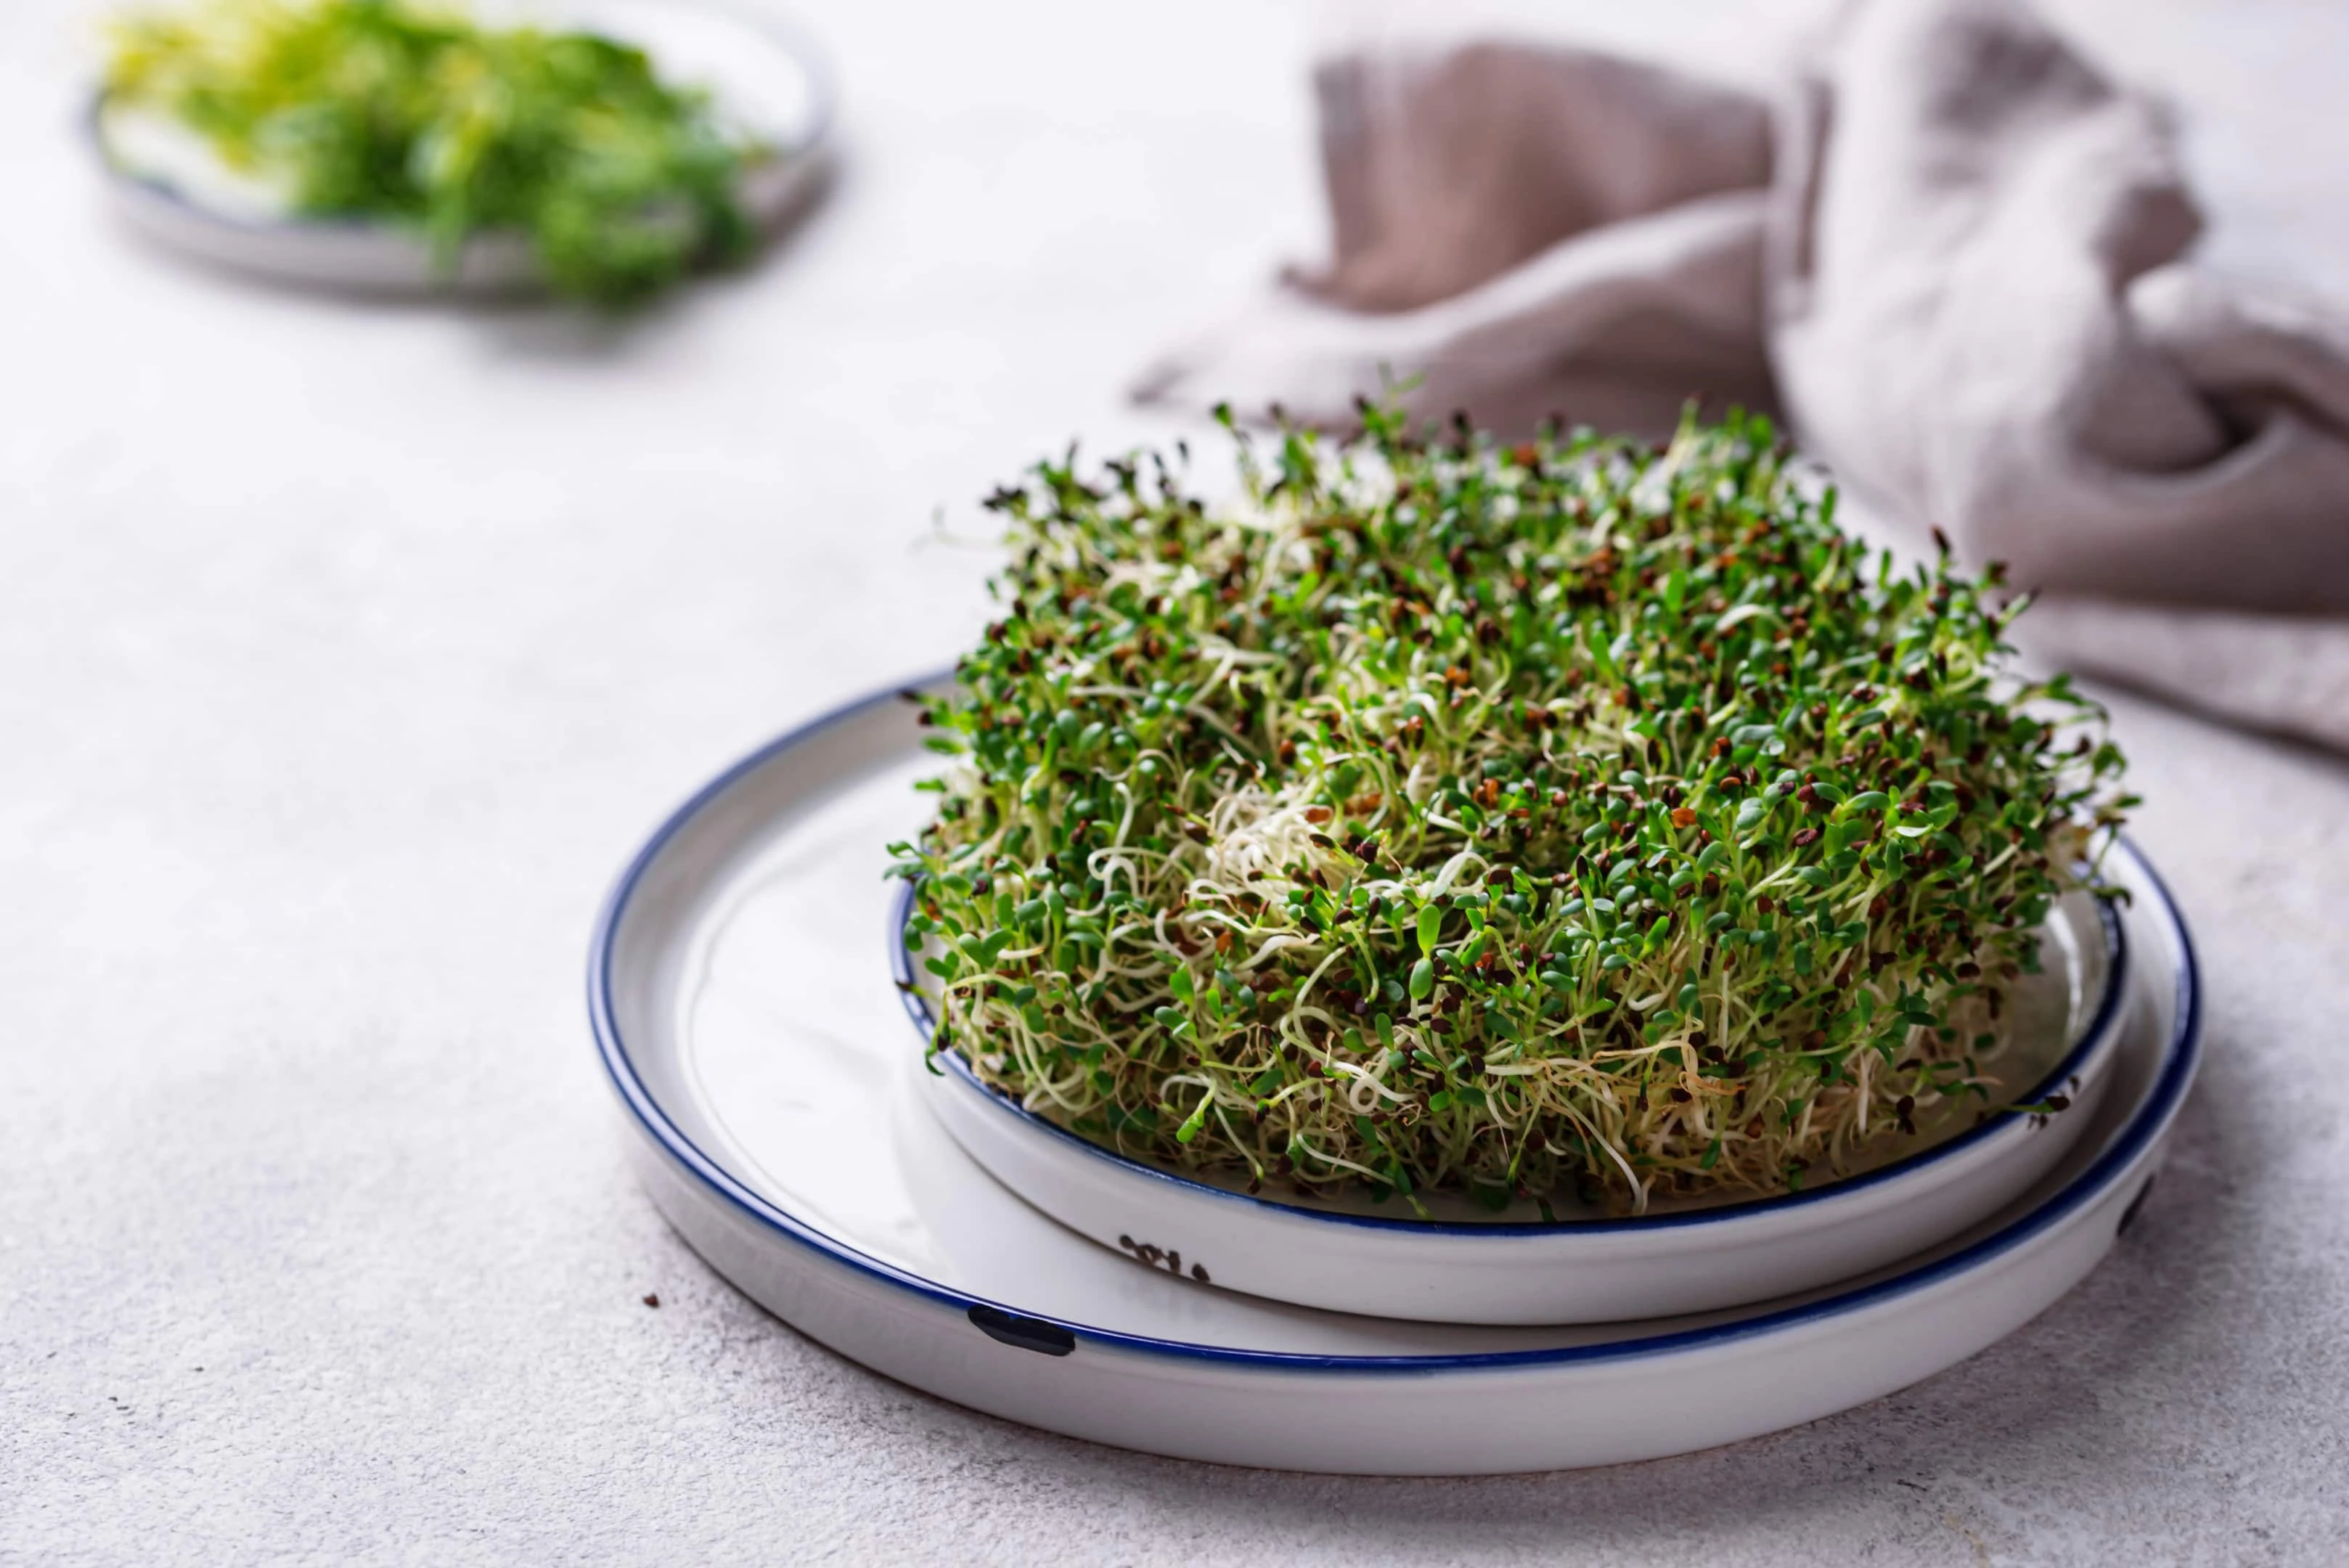 Microgreen sprouts alfalfa on plate